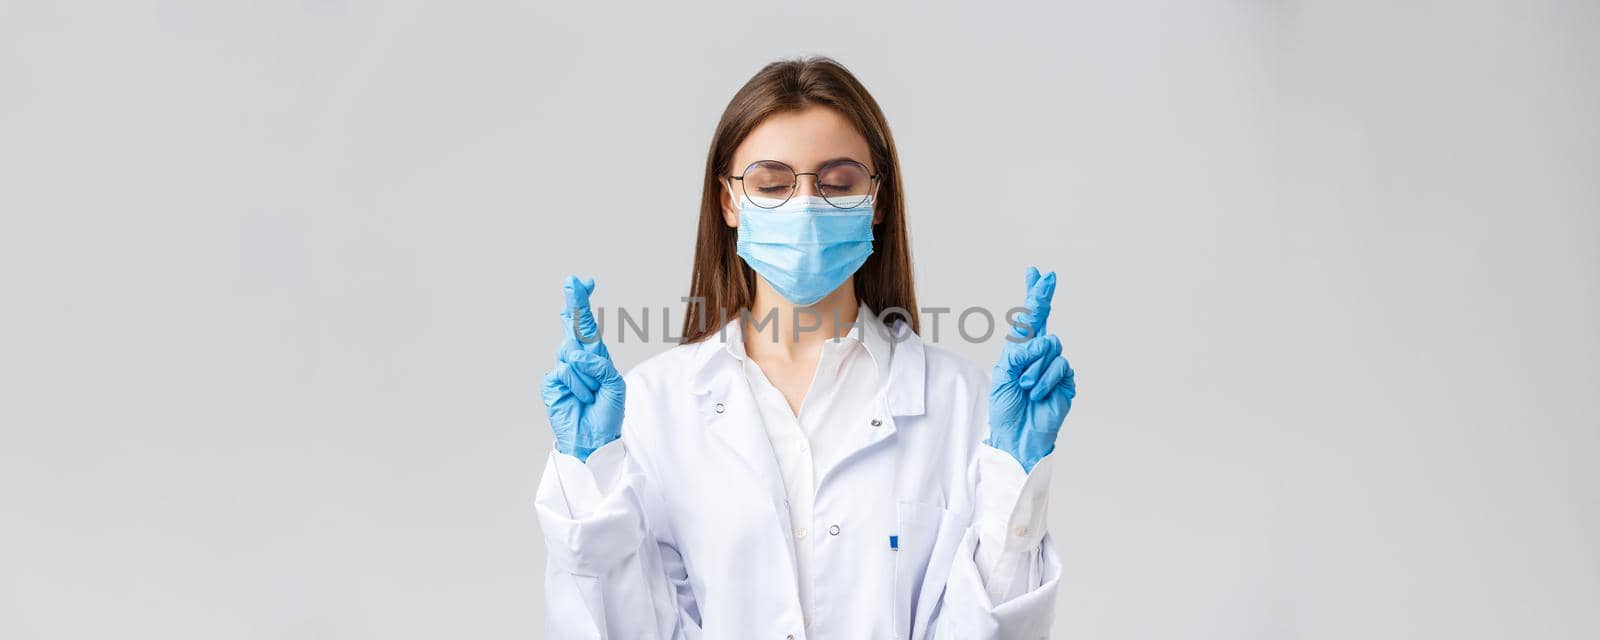 Covid-19, preventing virus, healthcare workers and quarantine concept. Hopeful doctor in white scrubs, medical face mask and gloves, close eyes, cross fingers and praying patients cure infection.